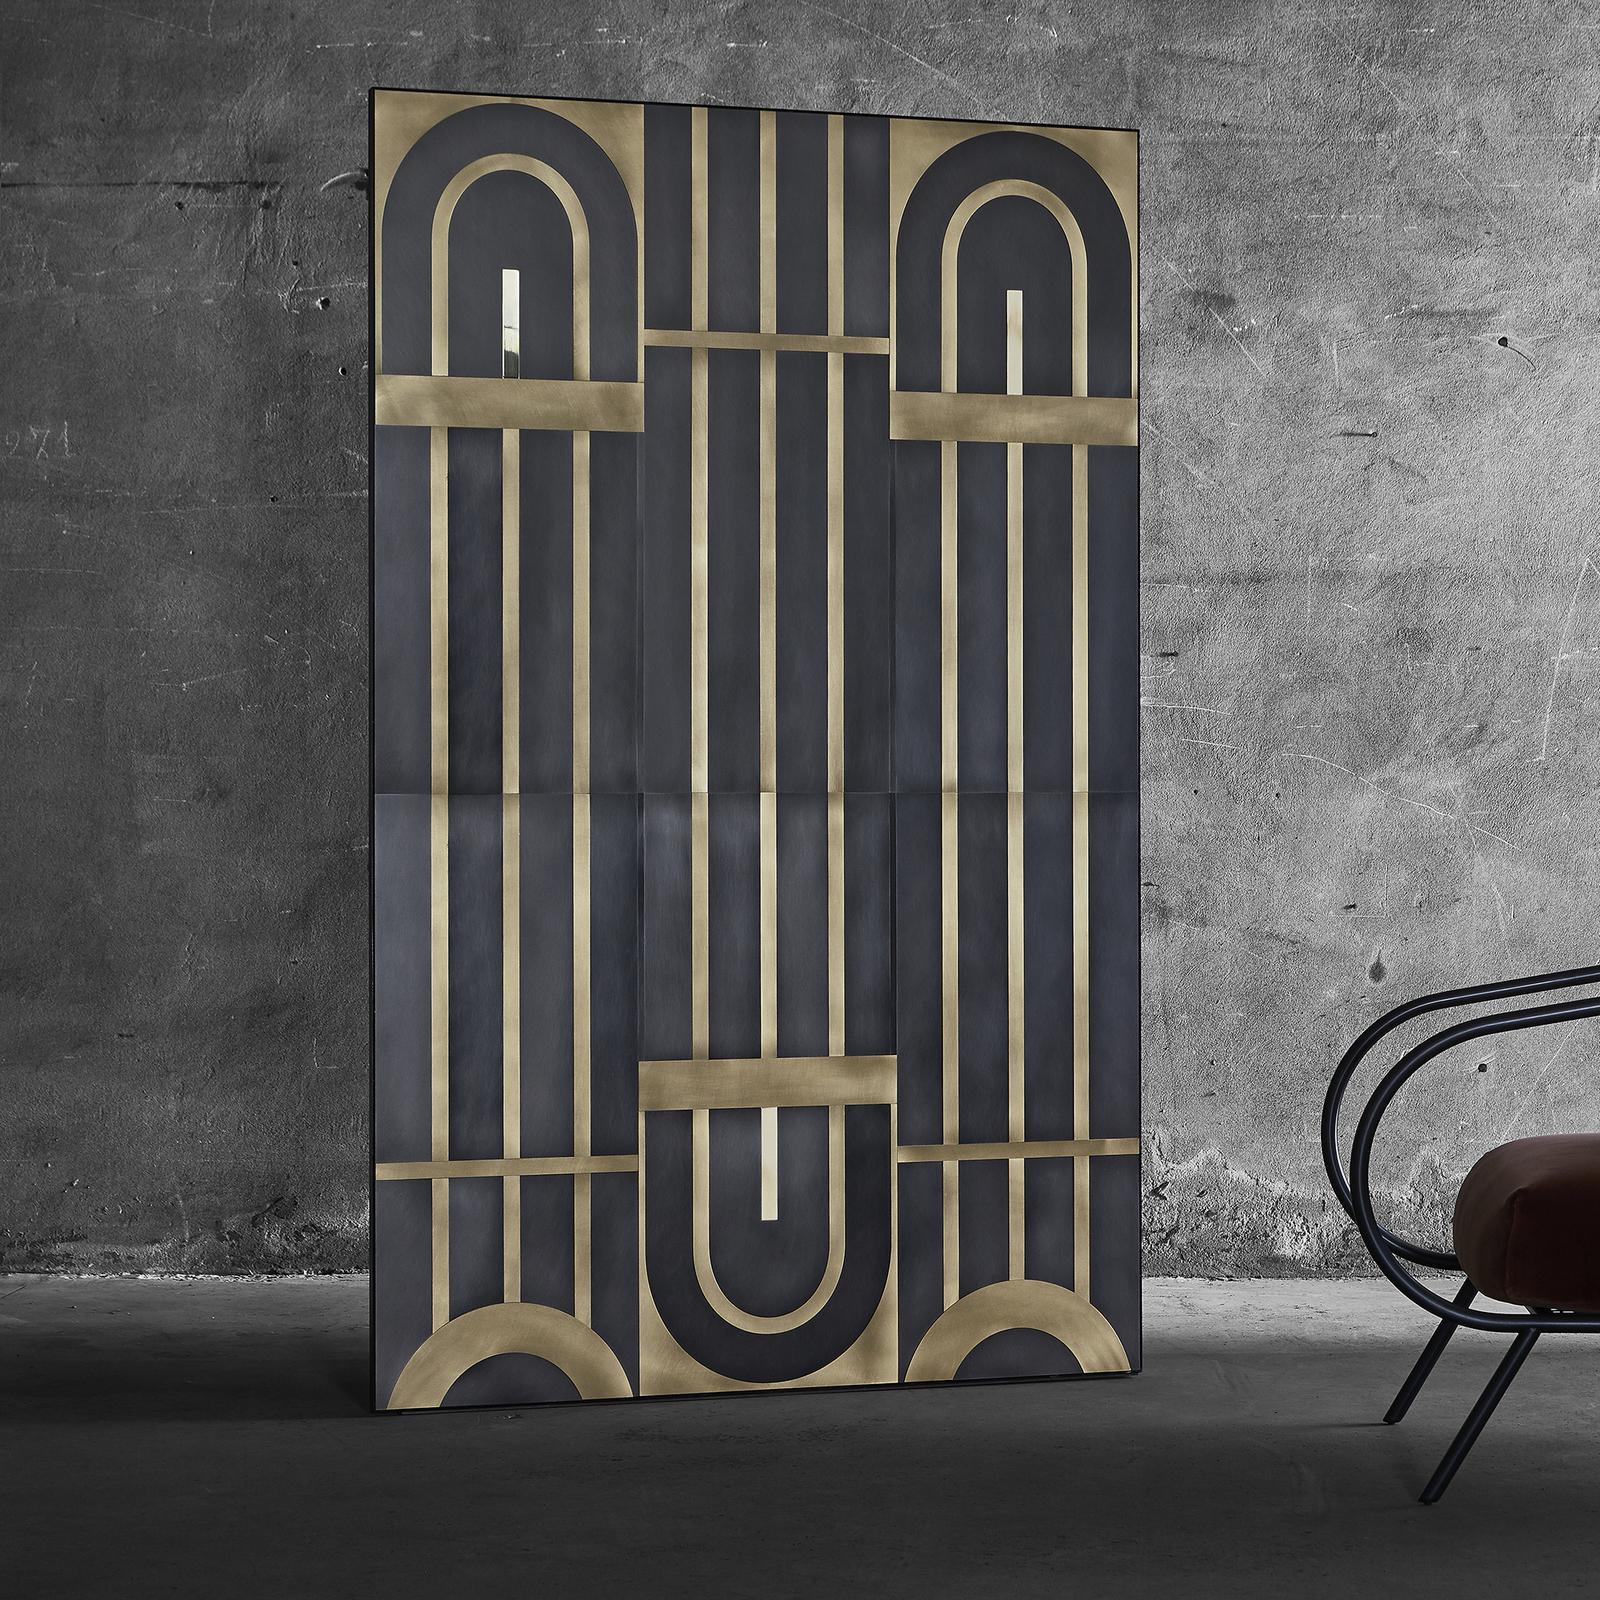 Inspired by the gates of the 1930s historic Milanese buildings, this brass covering has a multi-dimensional and architectural quality. The arches and lines of the design in bright gold over a black background have a tactile finish and visual depth